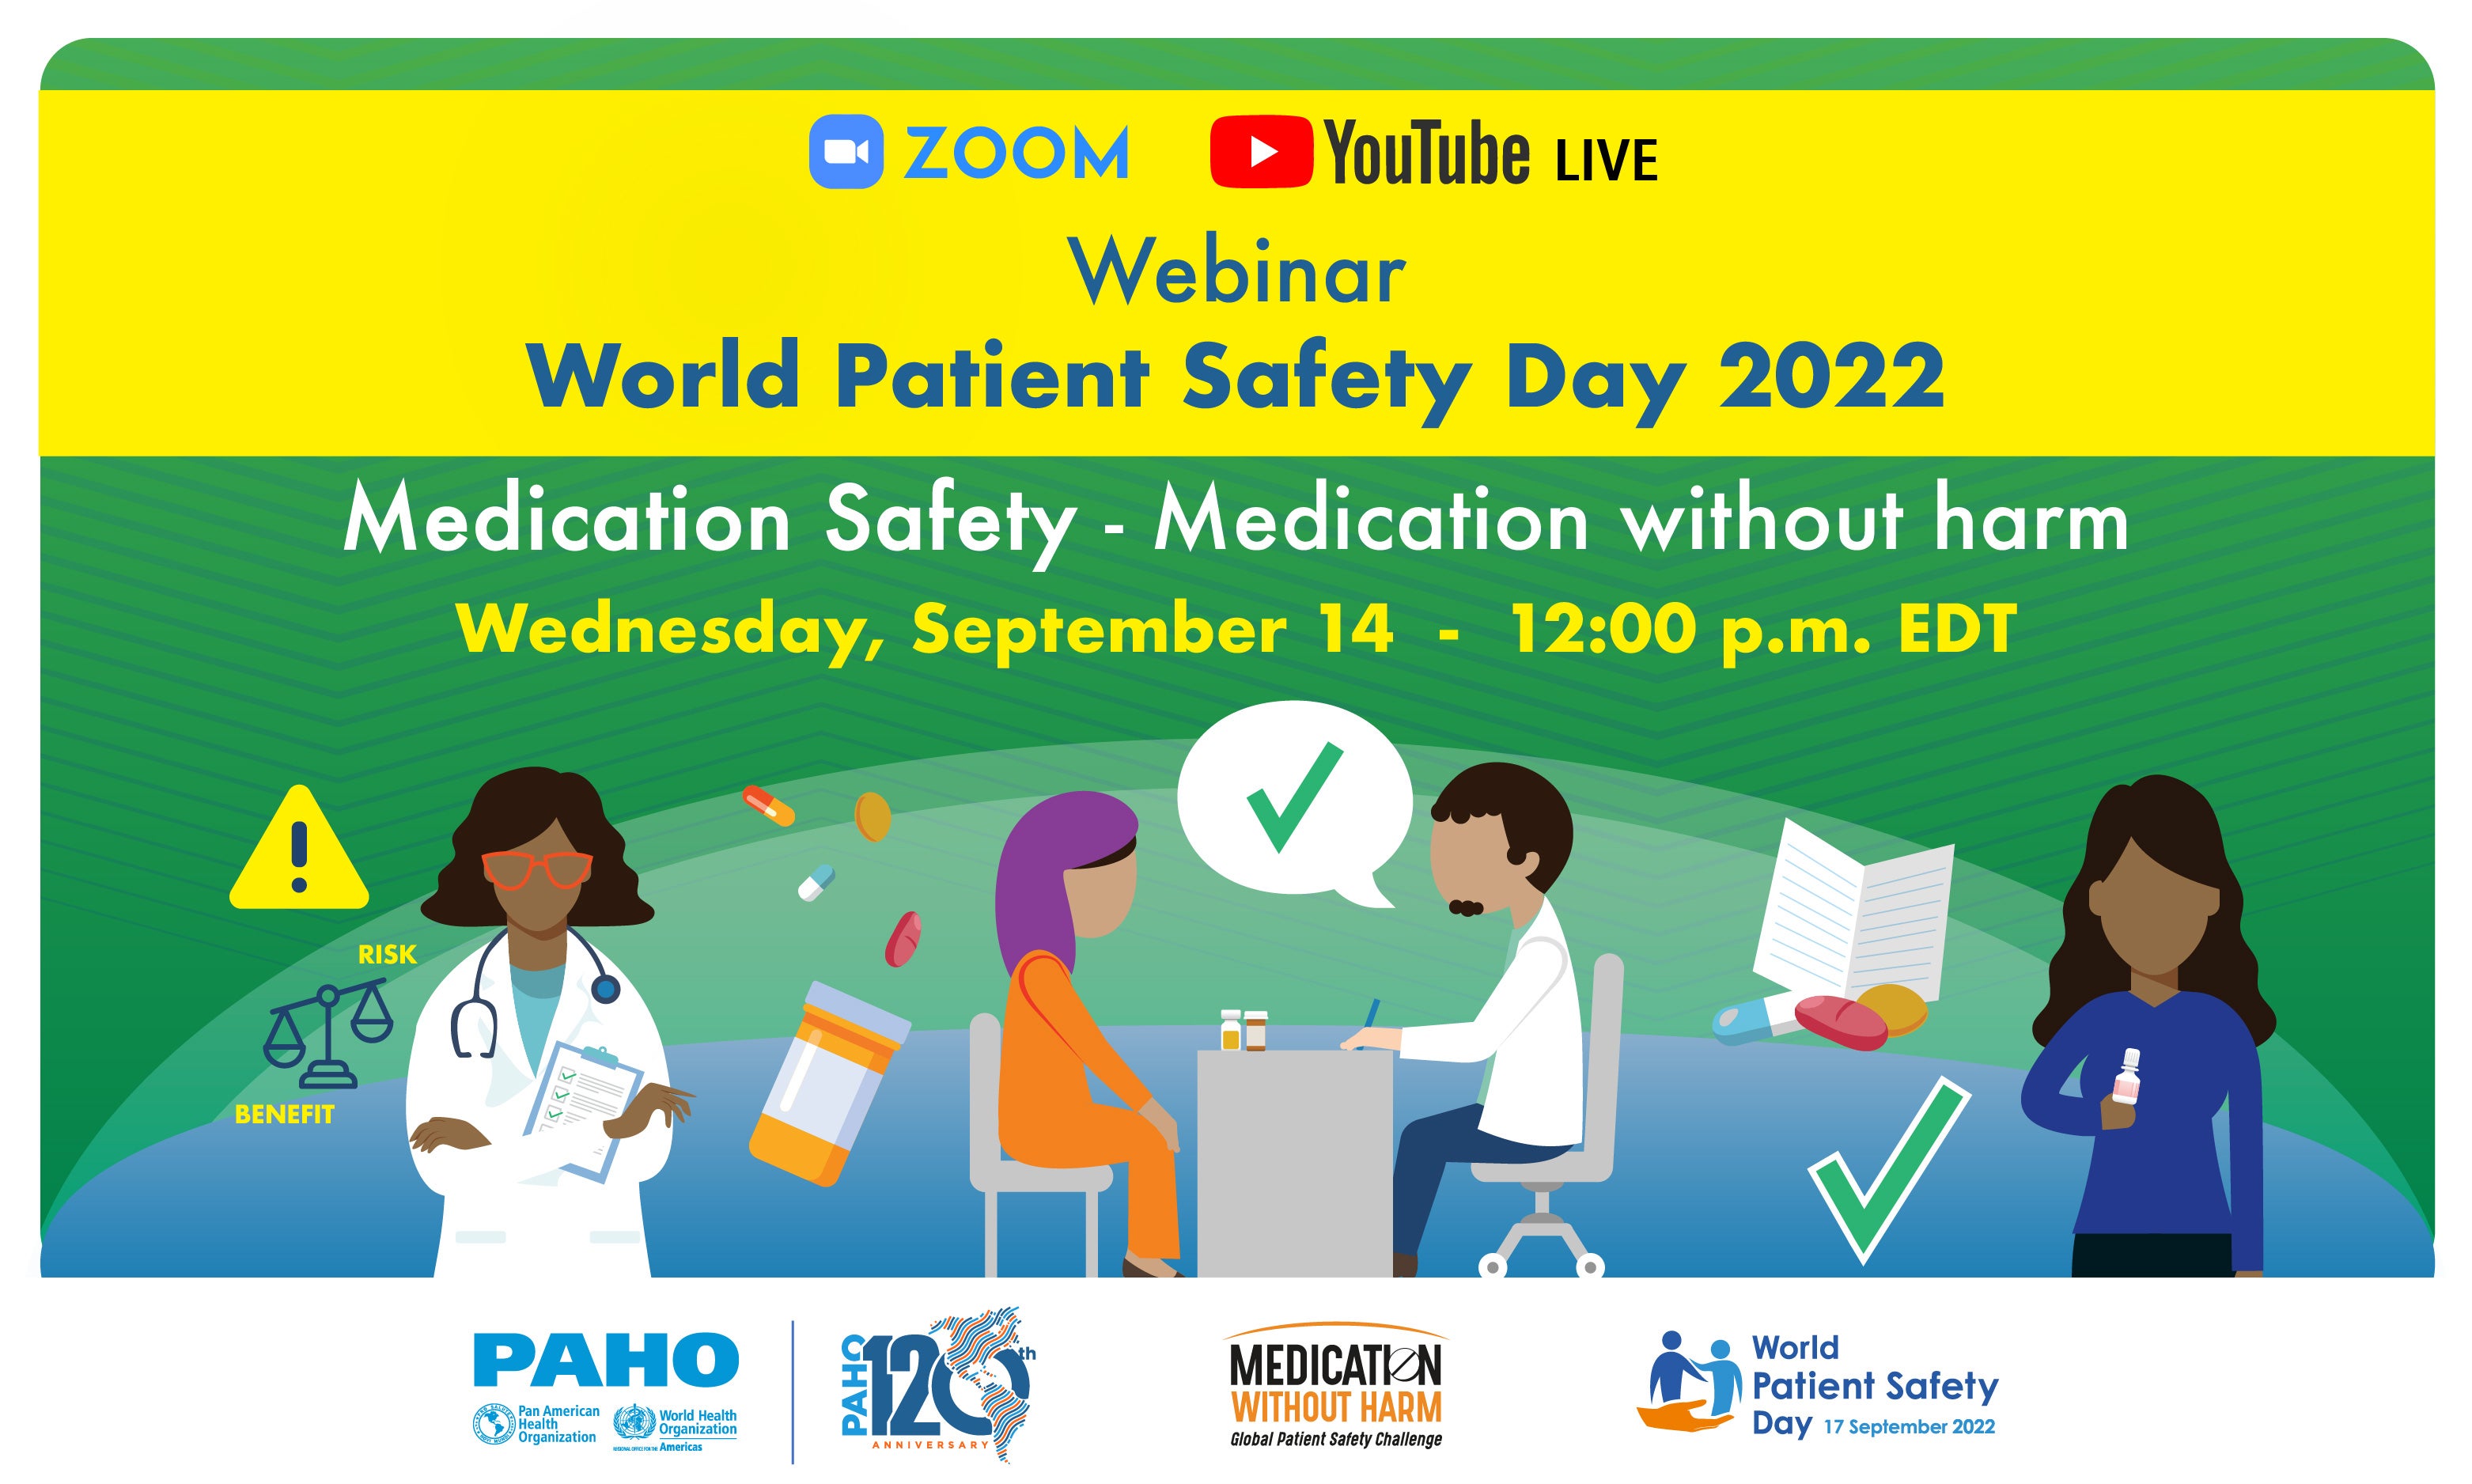 World Patient Safety Day 2022 PAHO/WHO Pan American Health Organization